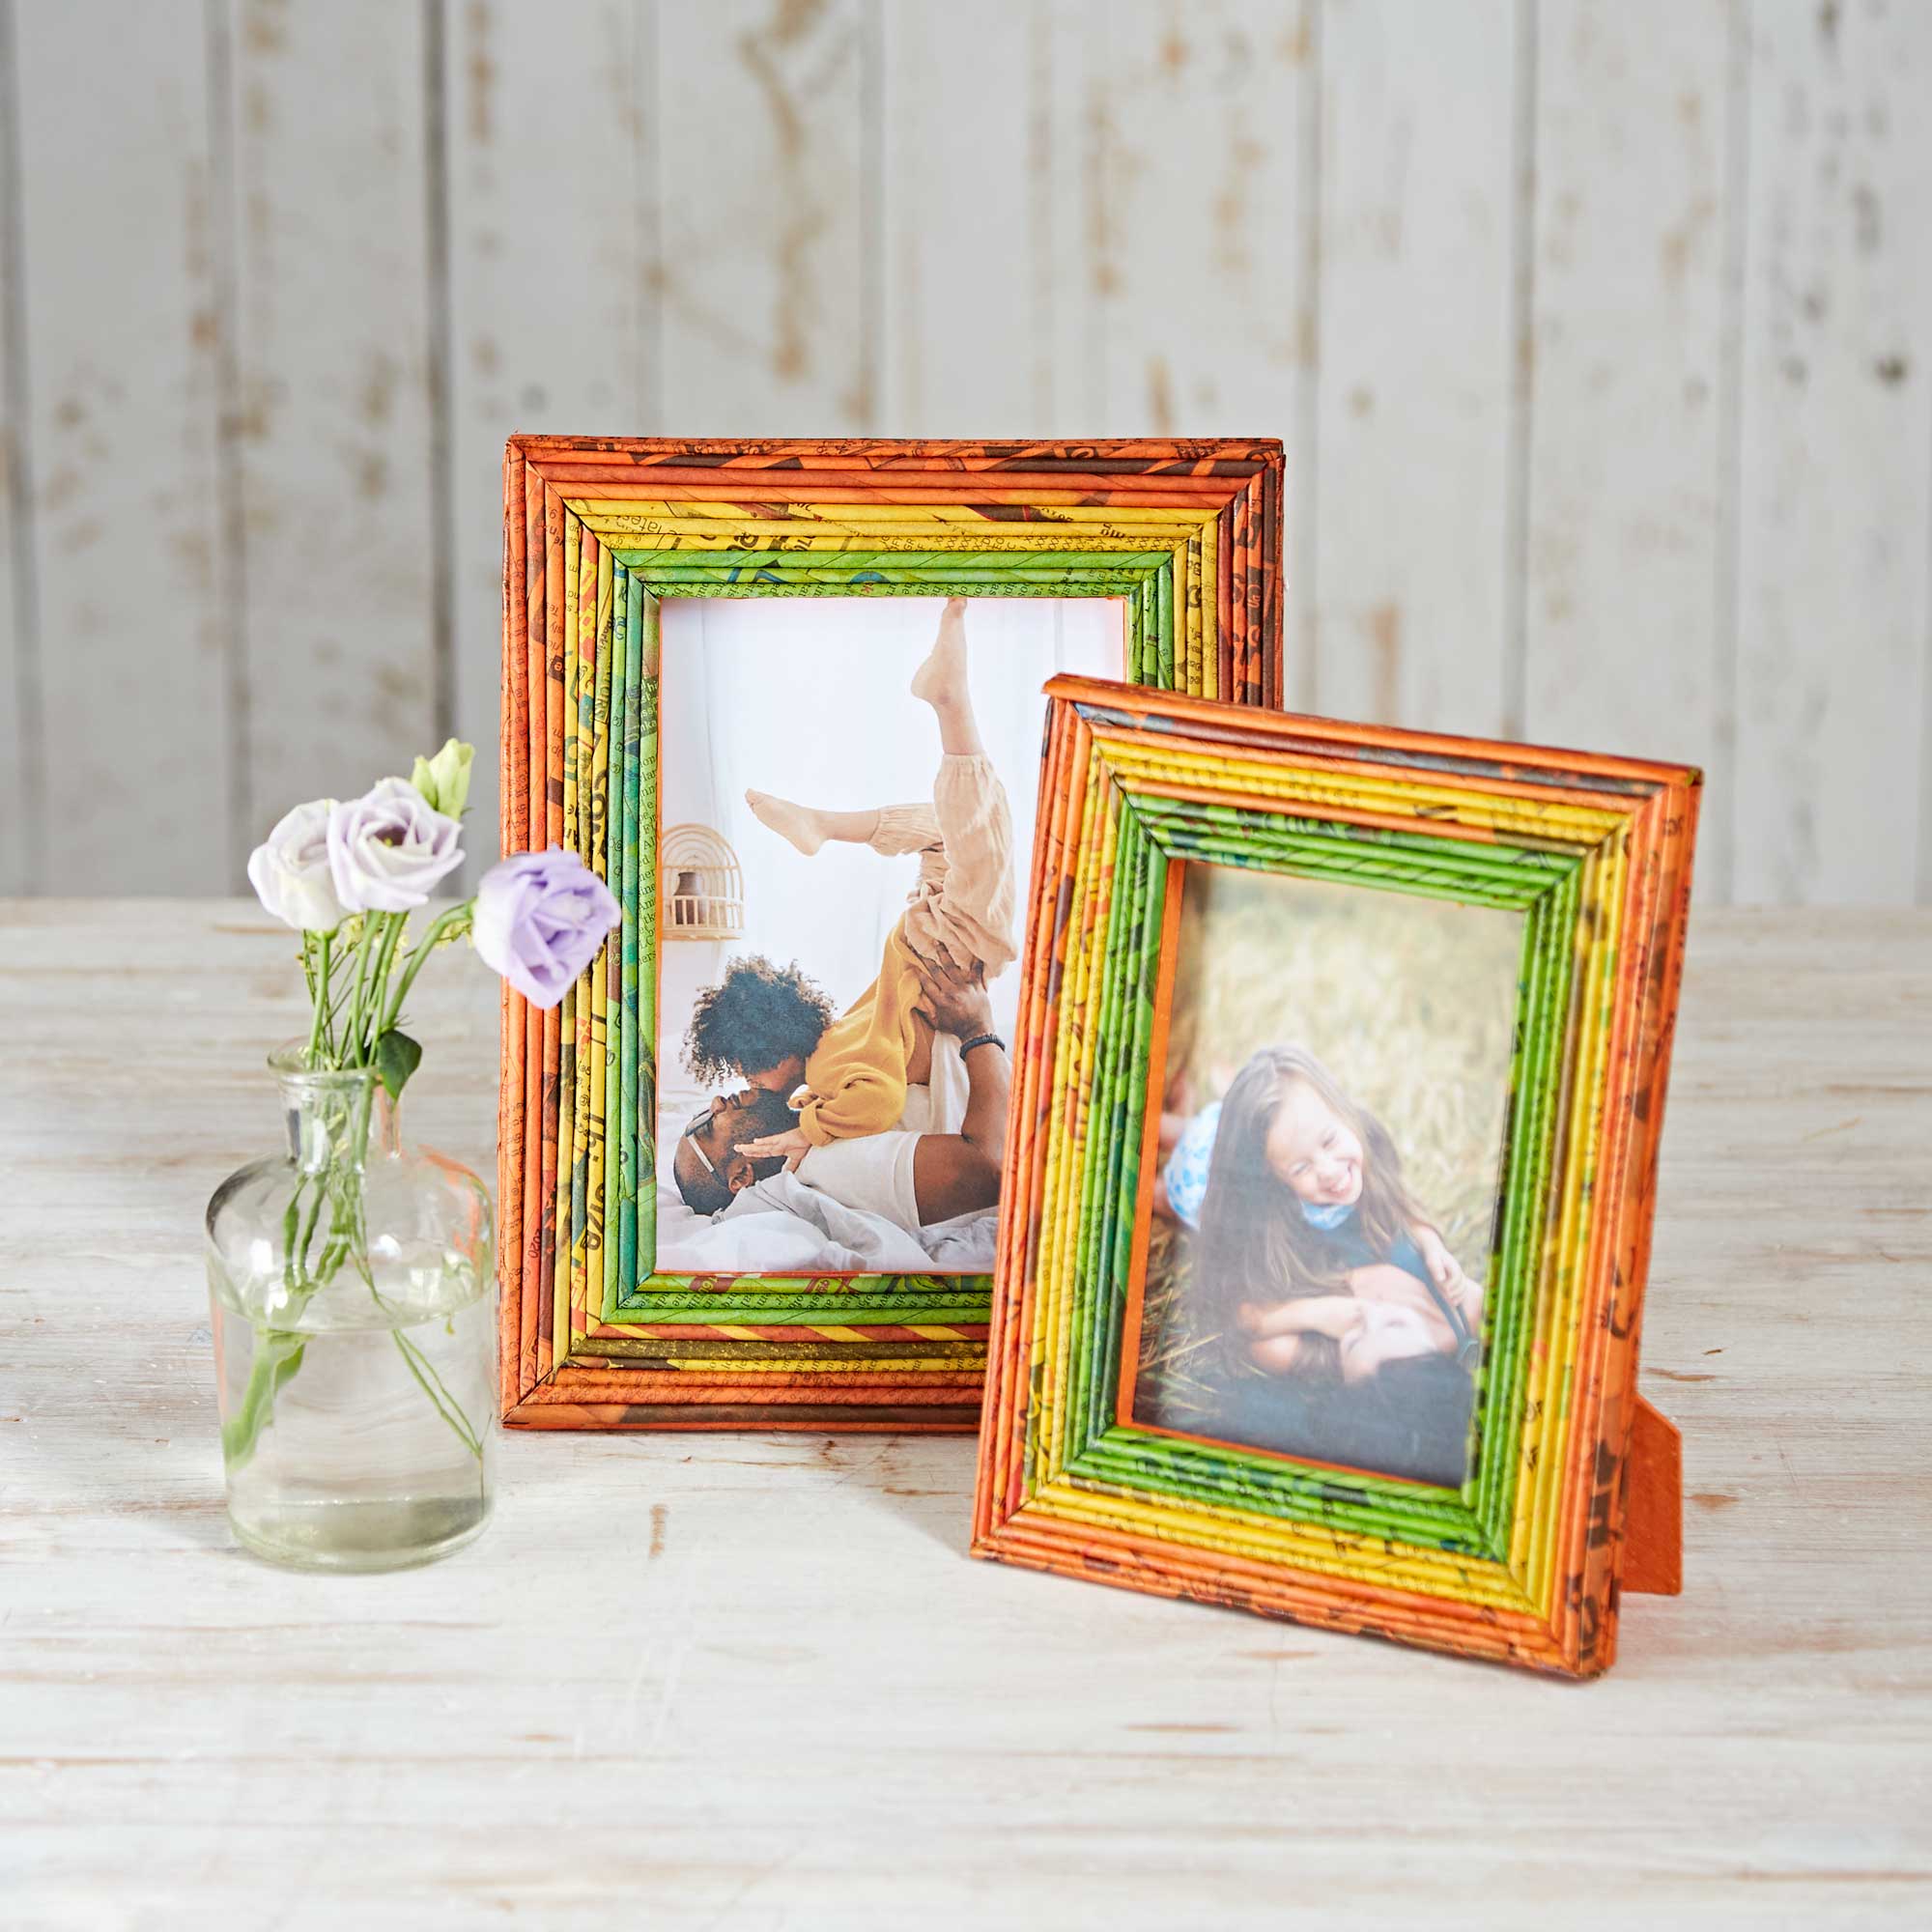 Recycled Newspaper Photo Frame - 4 x 6 Picture Frame - Feelin' Memphis LLC